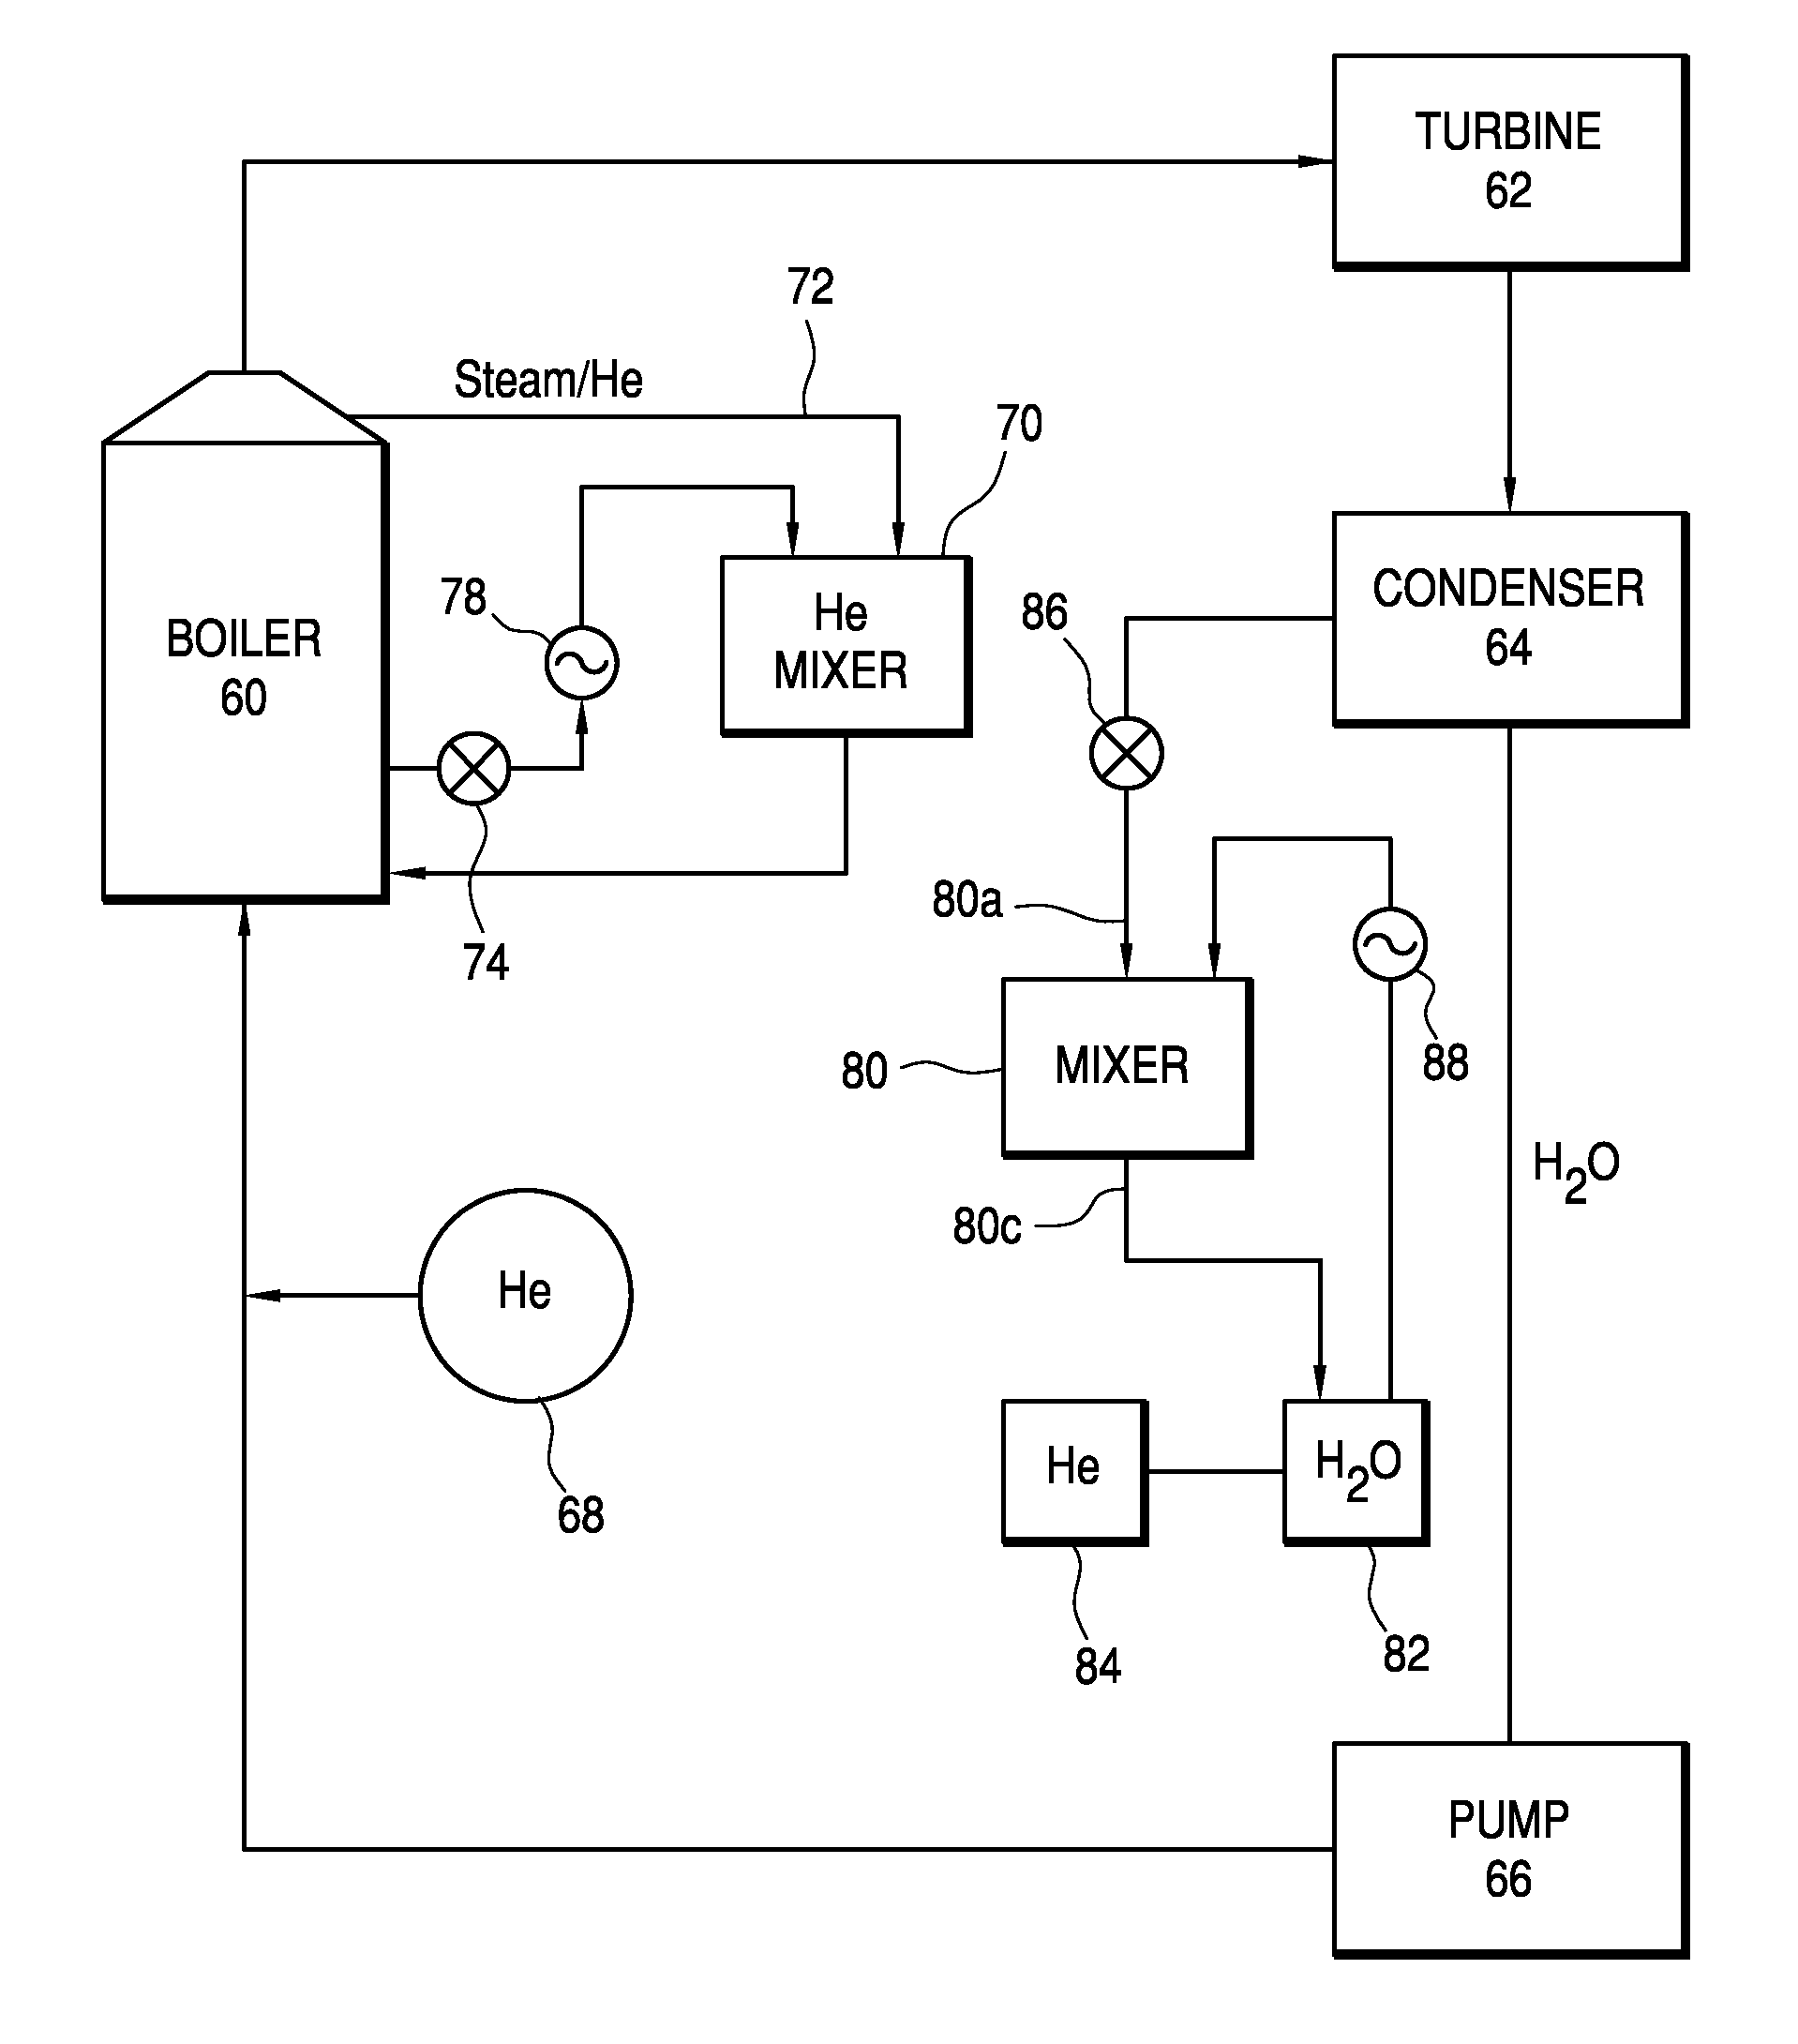 Method and apparatus for incorporating a low pressure fluid into a high pressure fluid, and increasing the efficiency of the rankine cycle in a power plant